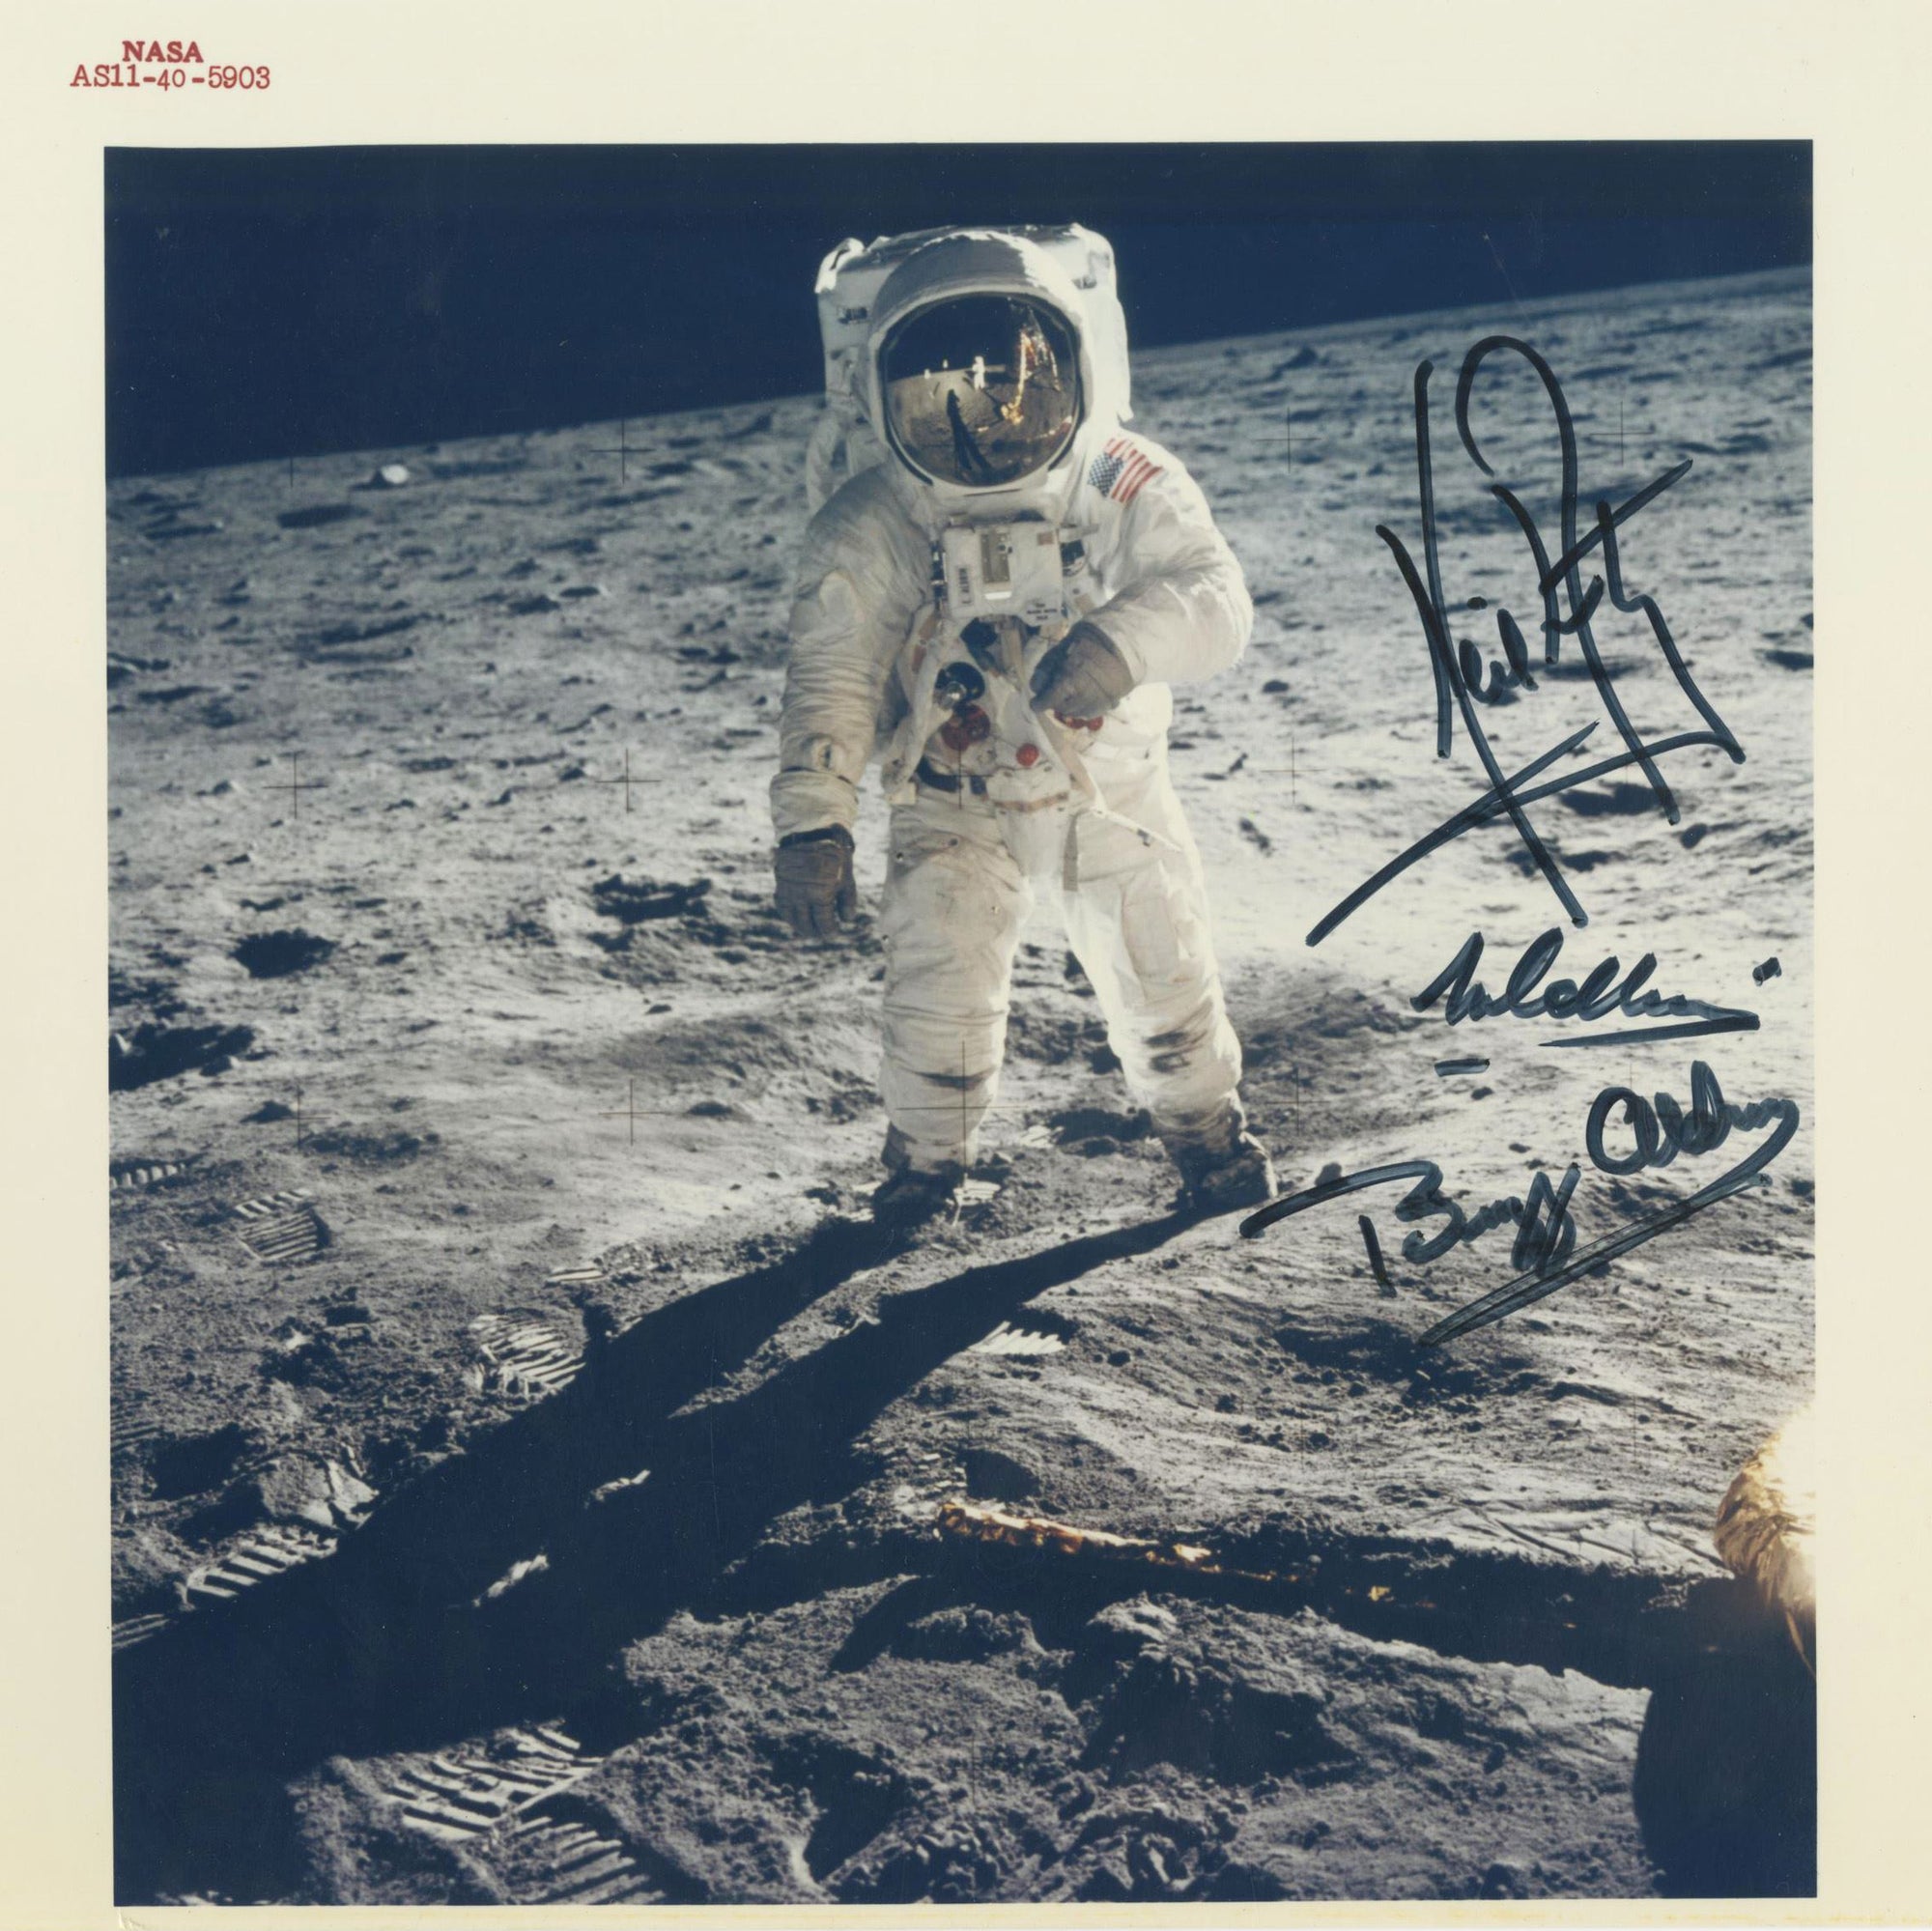 Our Company Founder John Reznikoff Discusses Collecting Space Autographs